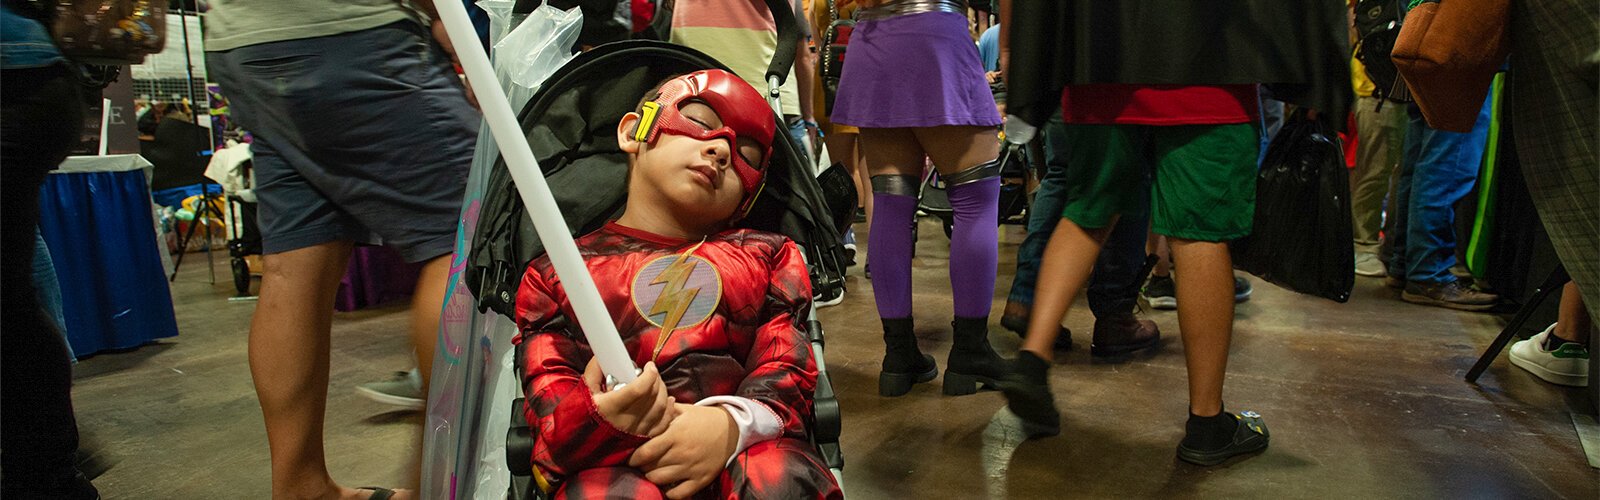 Joseph Martinez, 3, from Dade City, dressed as The Flash but took a nap before his family was ready to leave.